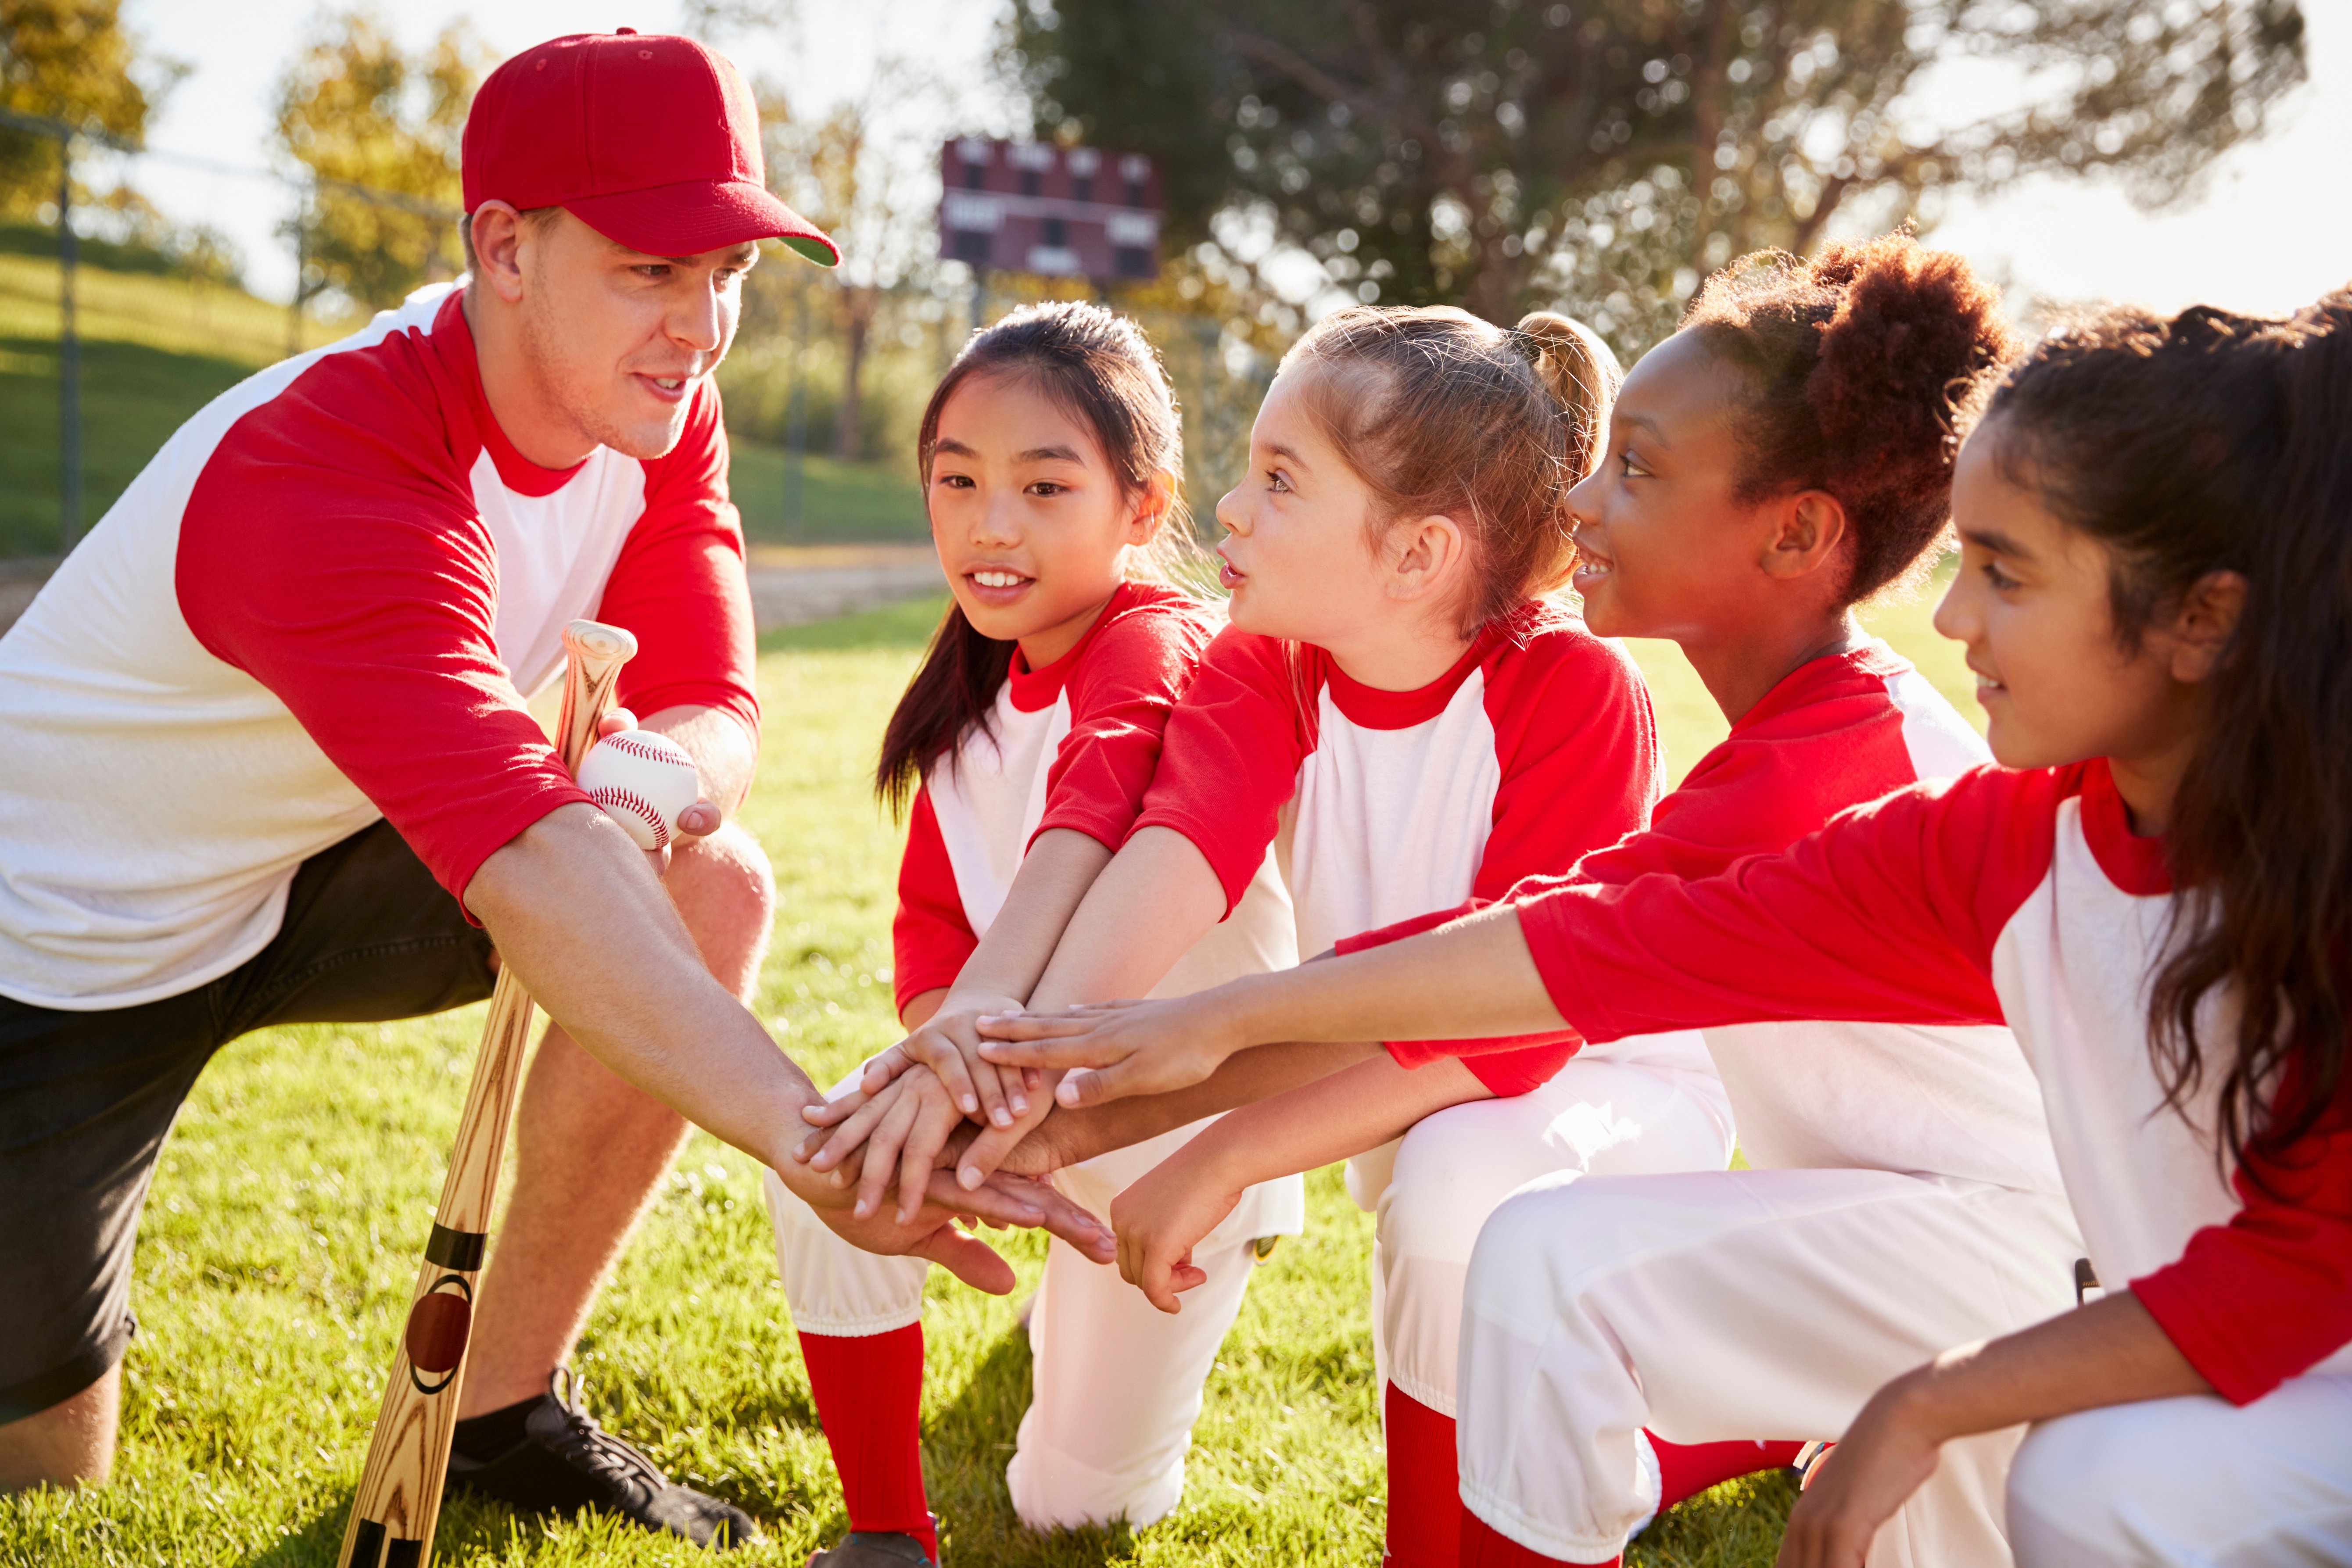 physical activity before and after school kids baseball